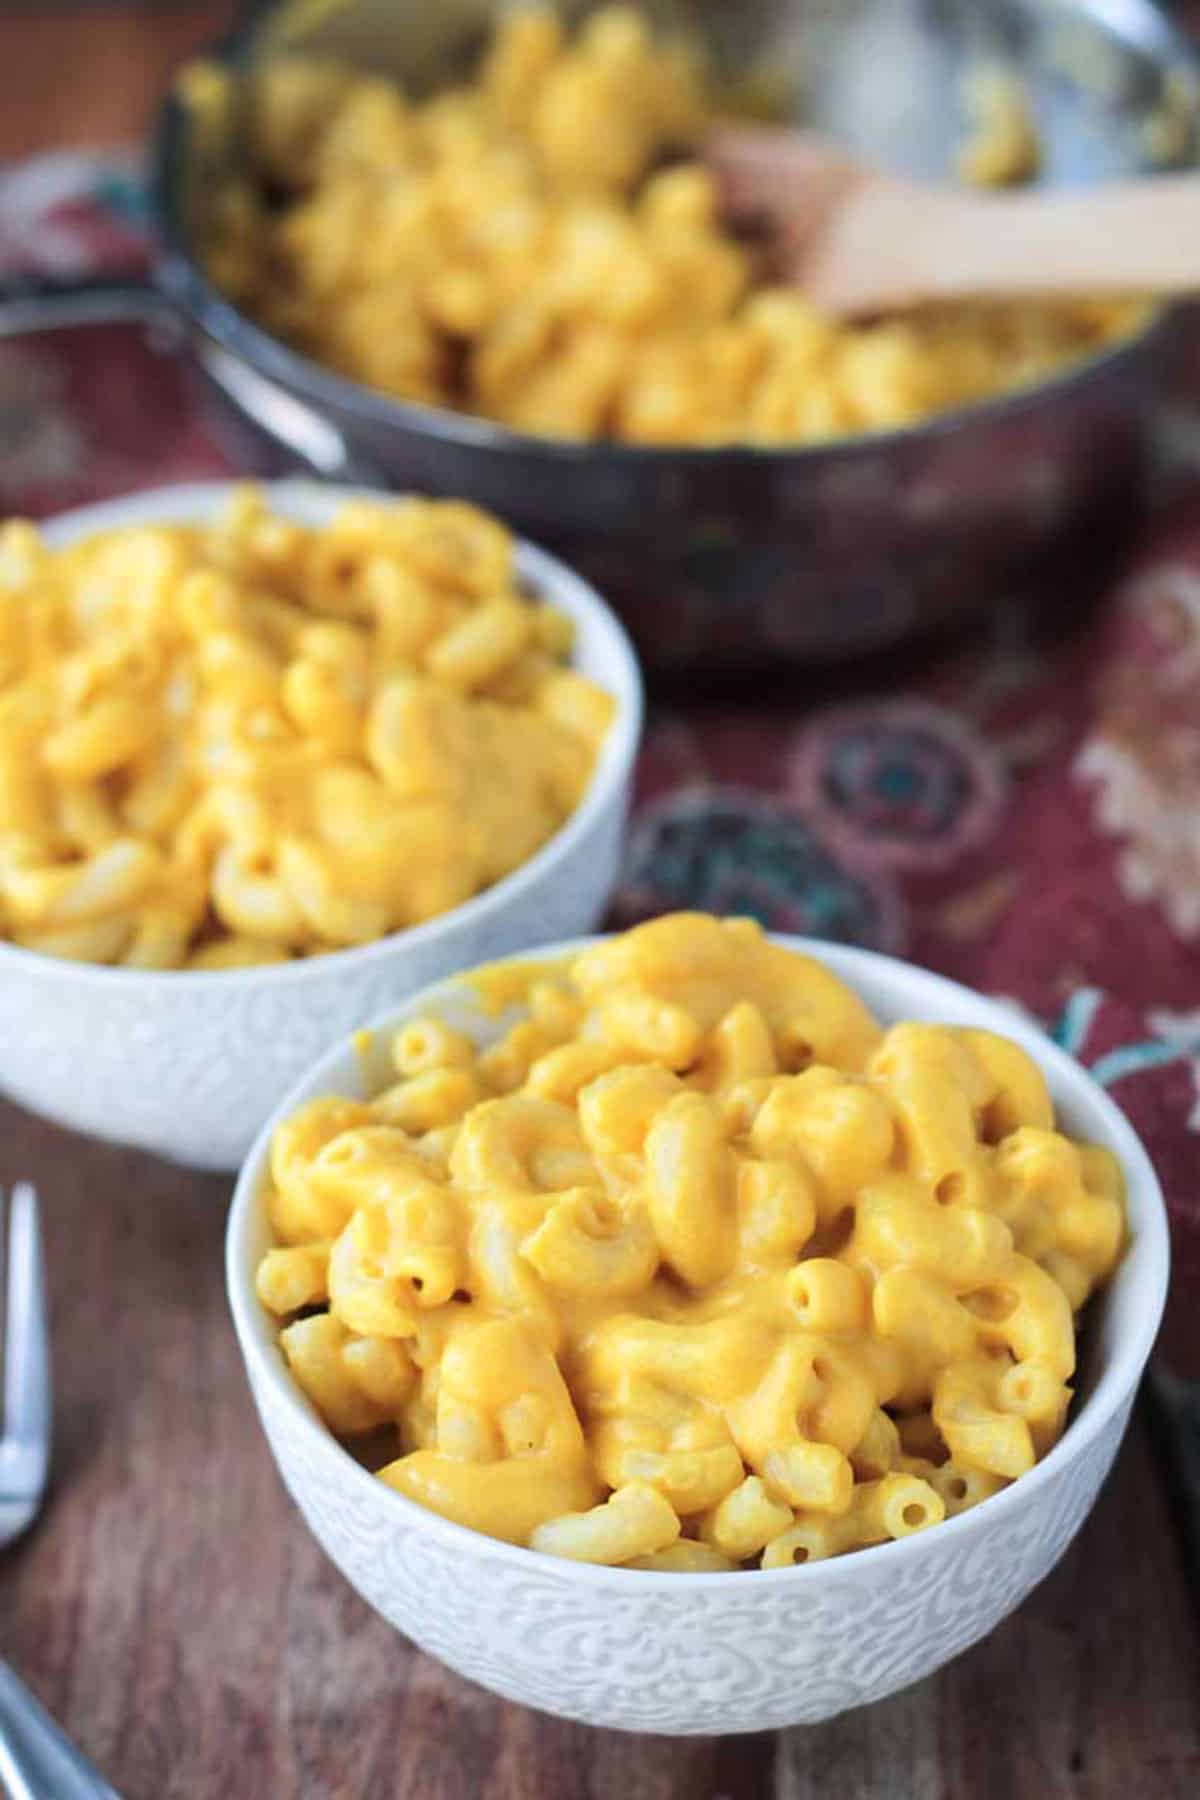 Two bowls of creamy pasta.